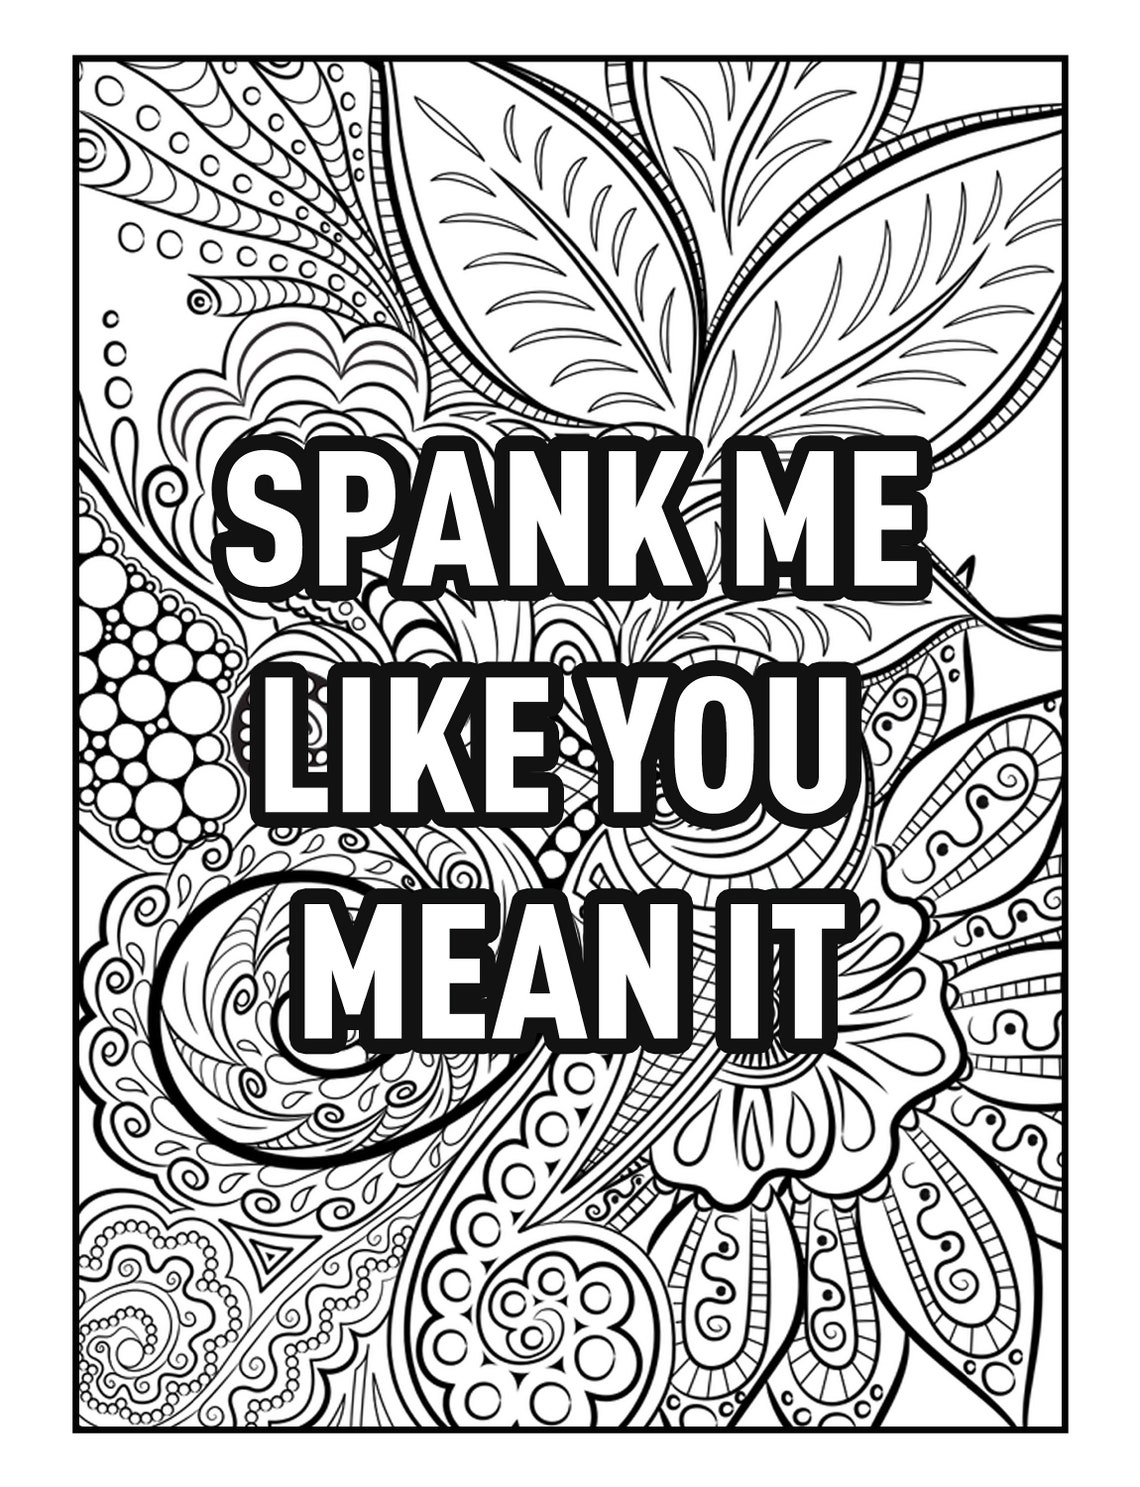 41-dirty-funny-coloring-pages-for-adults-adult-coloring-book-etsy